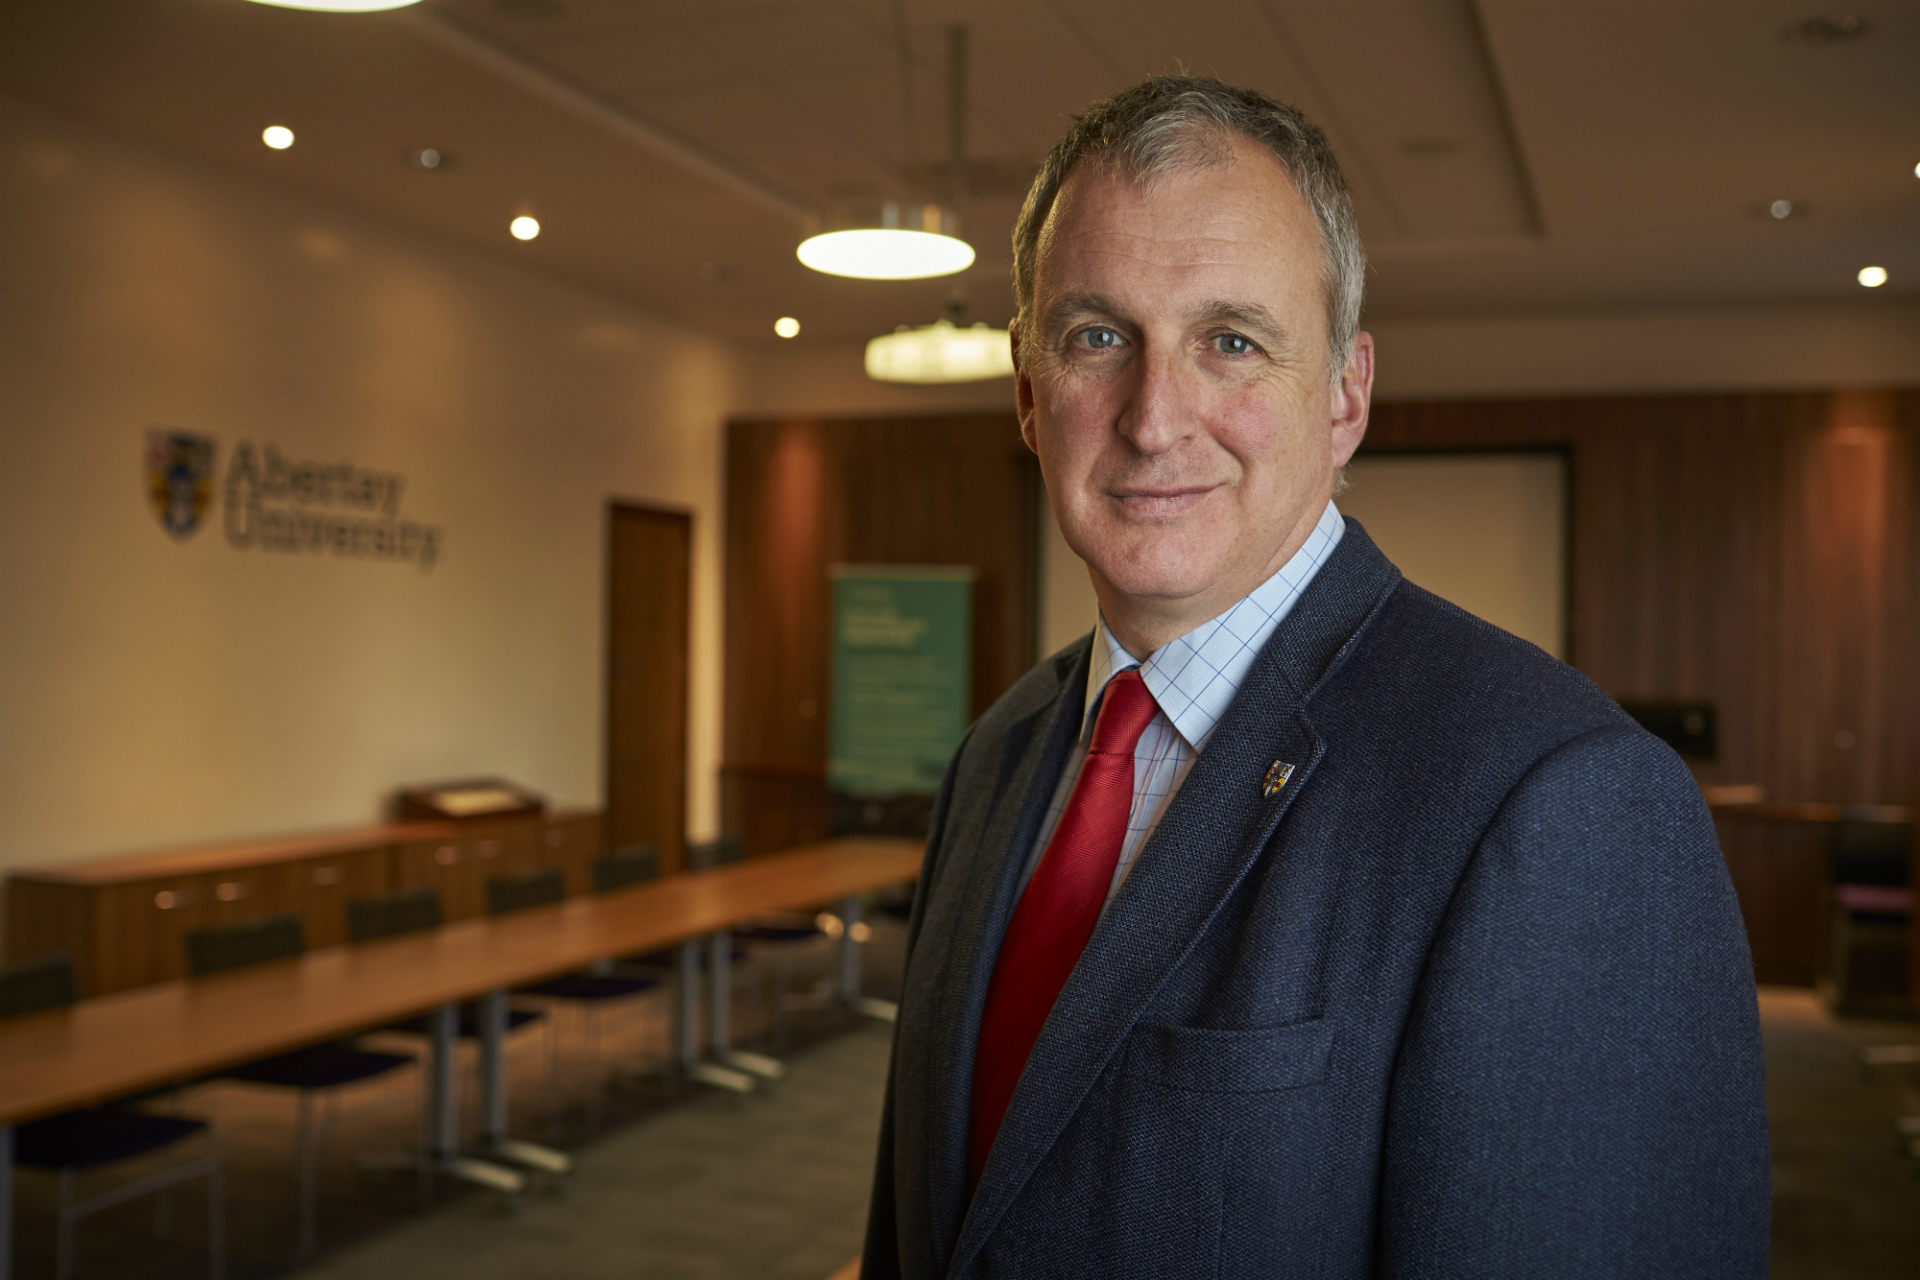 Abertay University Principal announces plans to step down in 2022